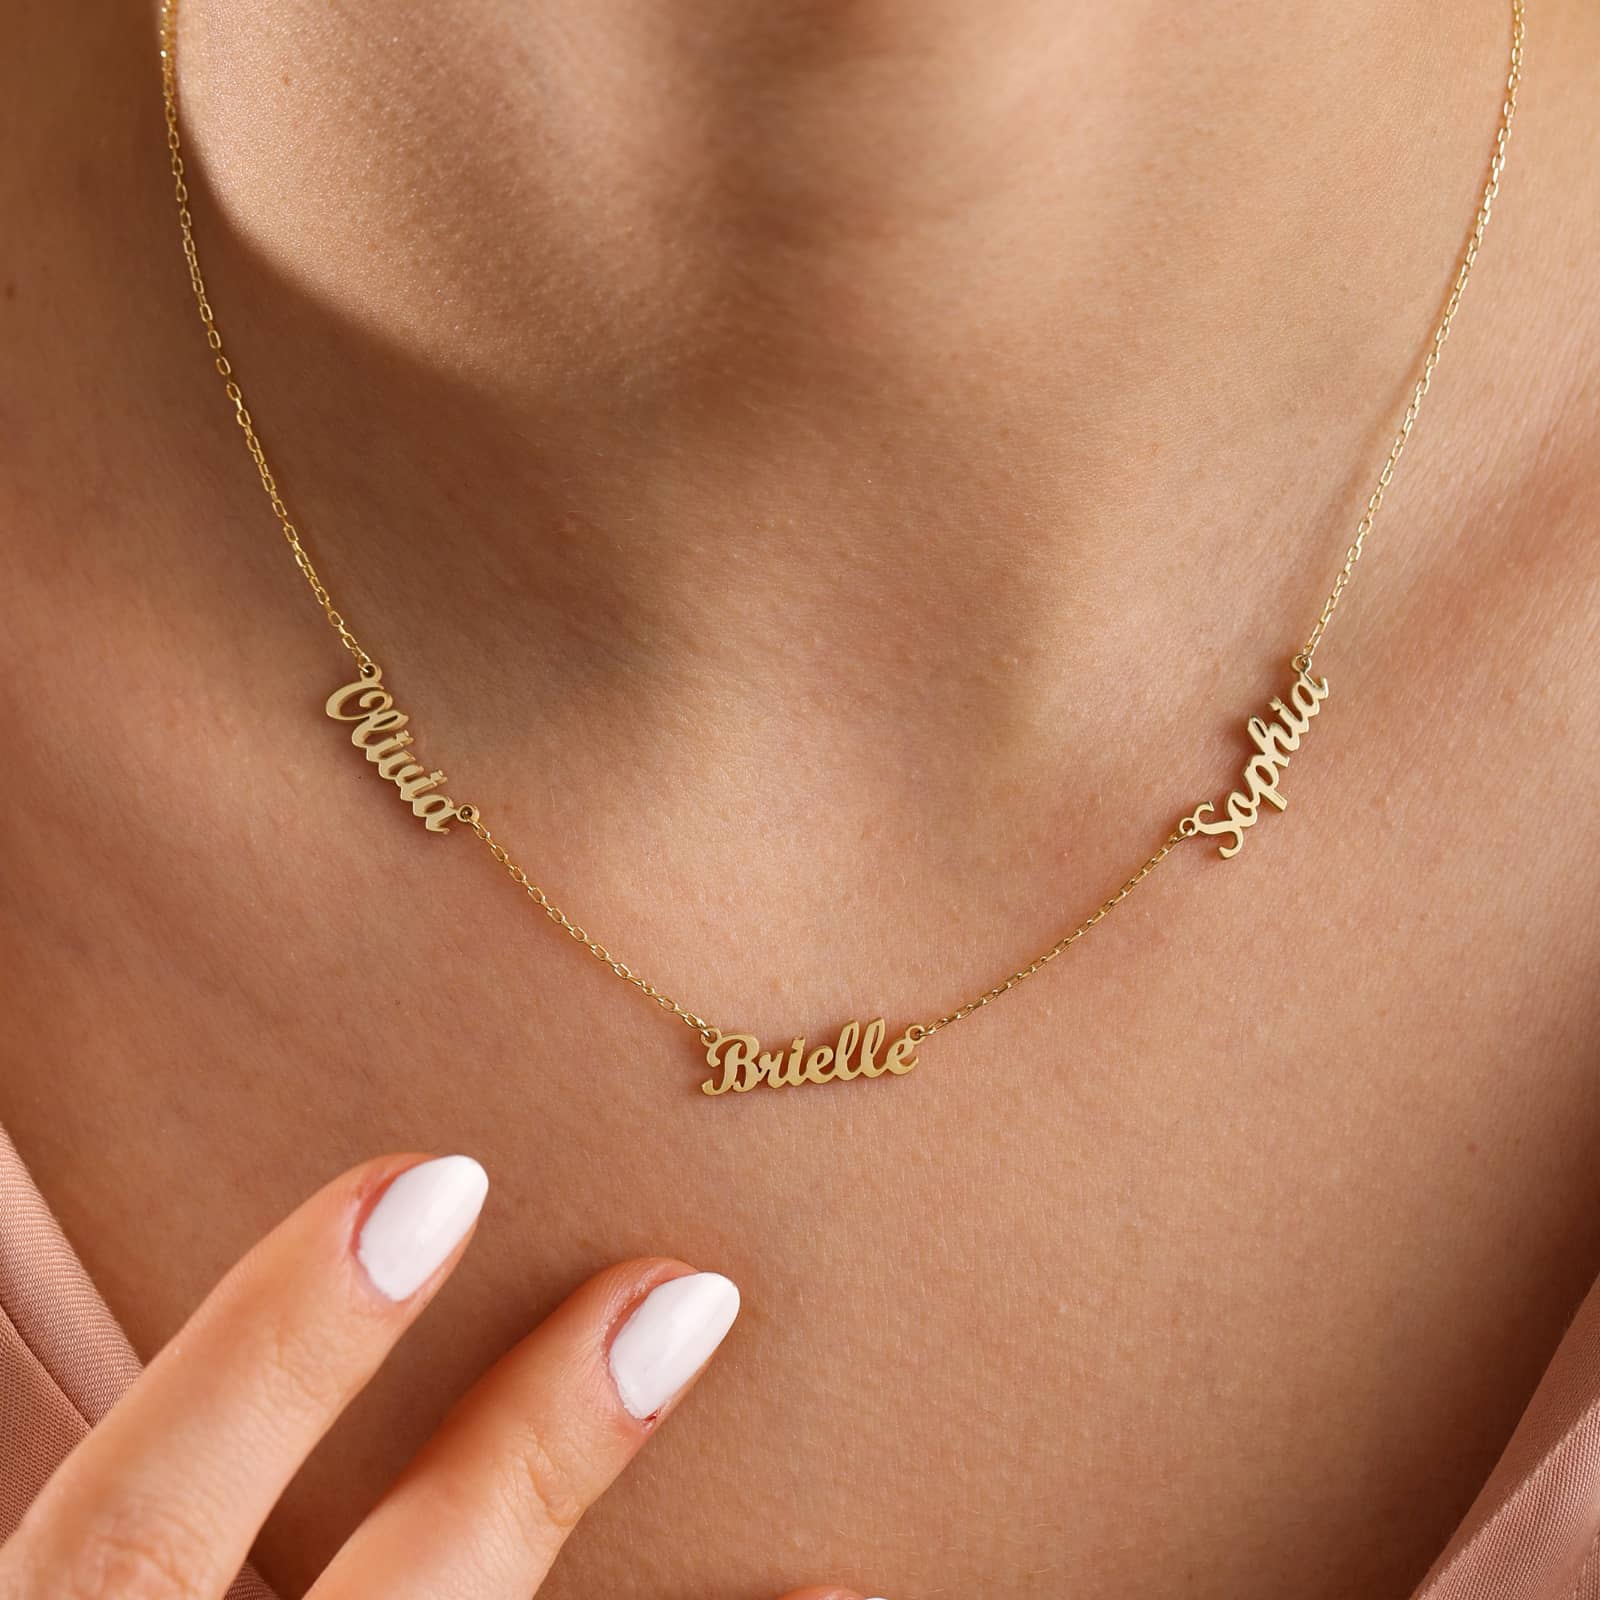 Create Cherished Memories this Mother’s Day with Kidwis Customized Name Necklaces